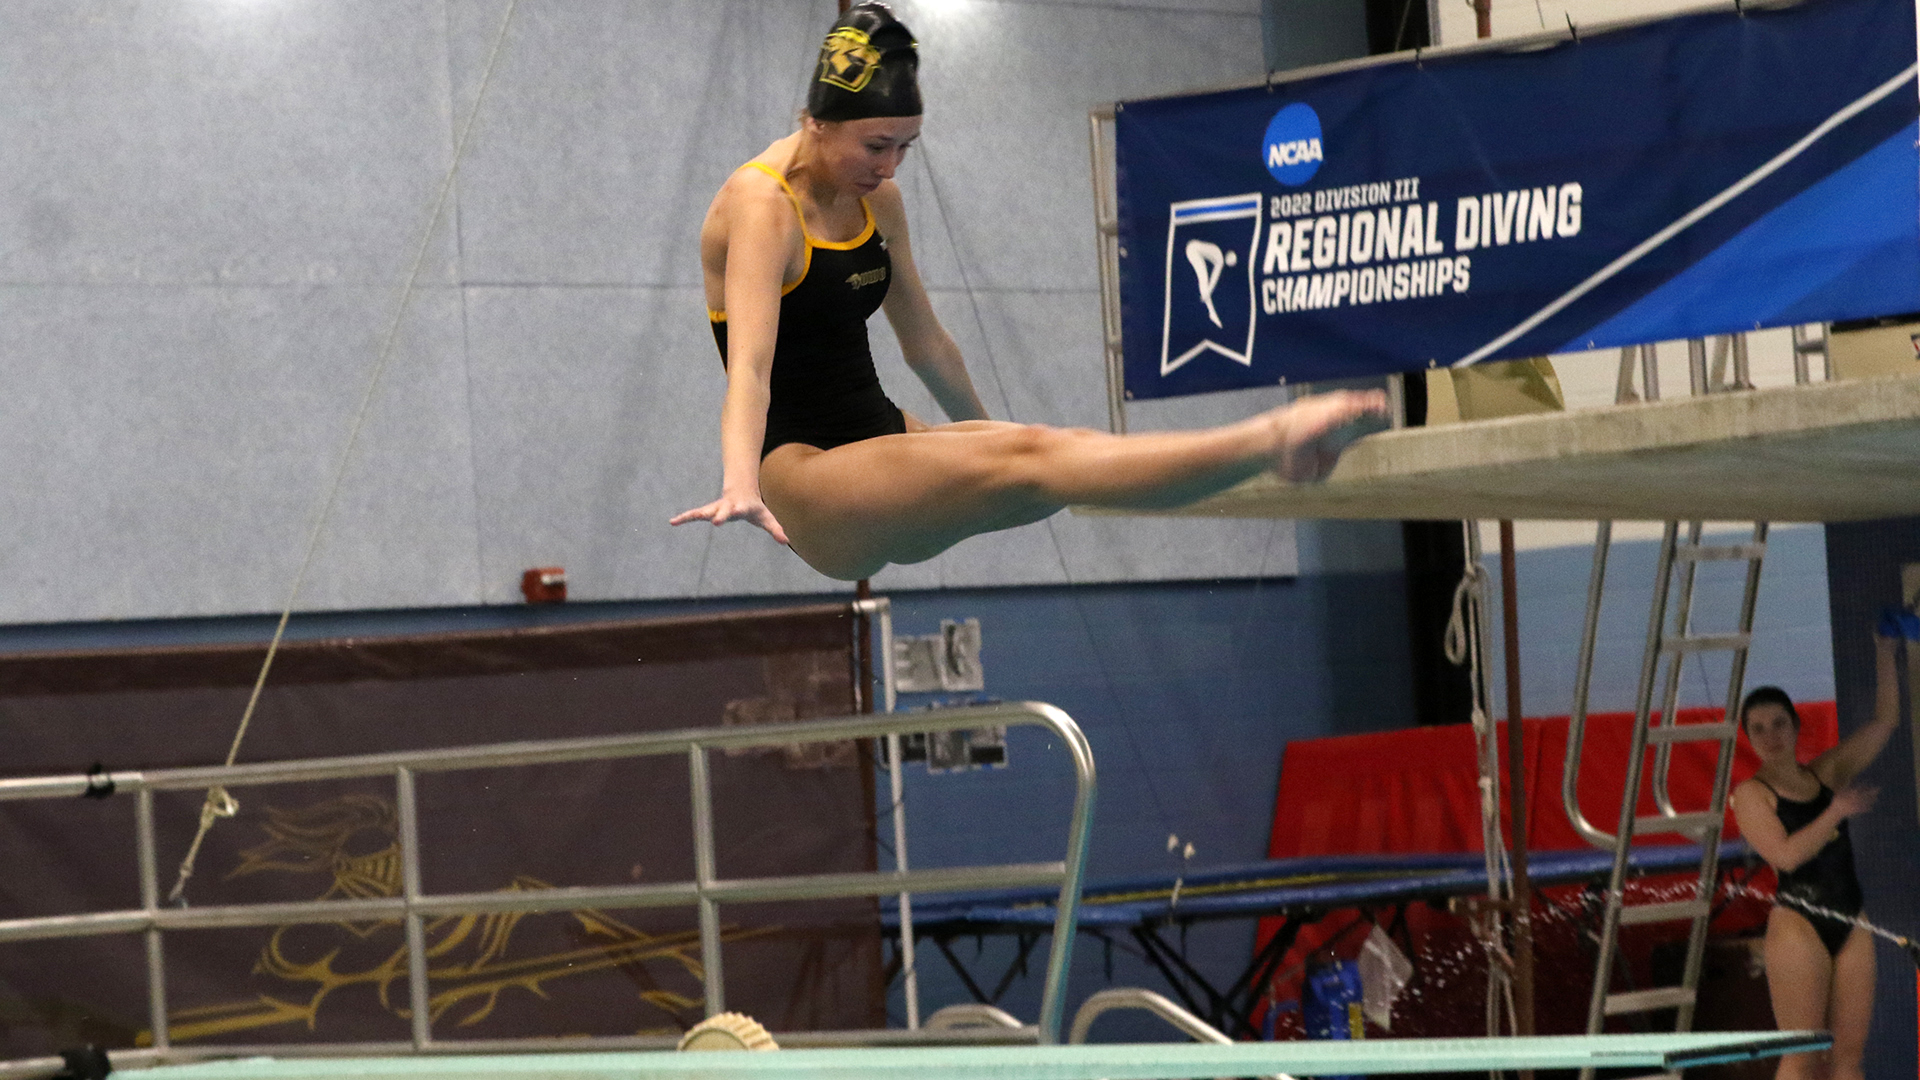 Bailey Schroeder capped an outstanding freshman season with an 18th-place finish at the NCAA Division III Region 1 Diving Championships.